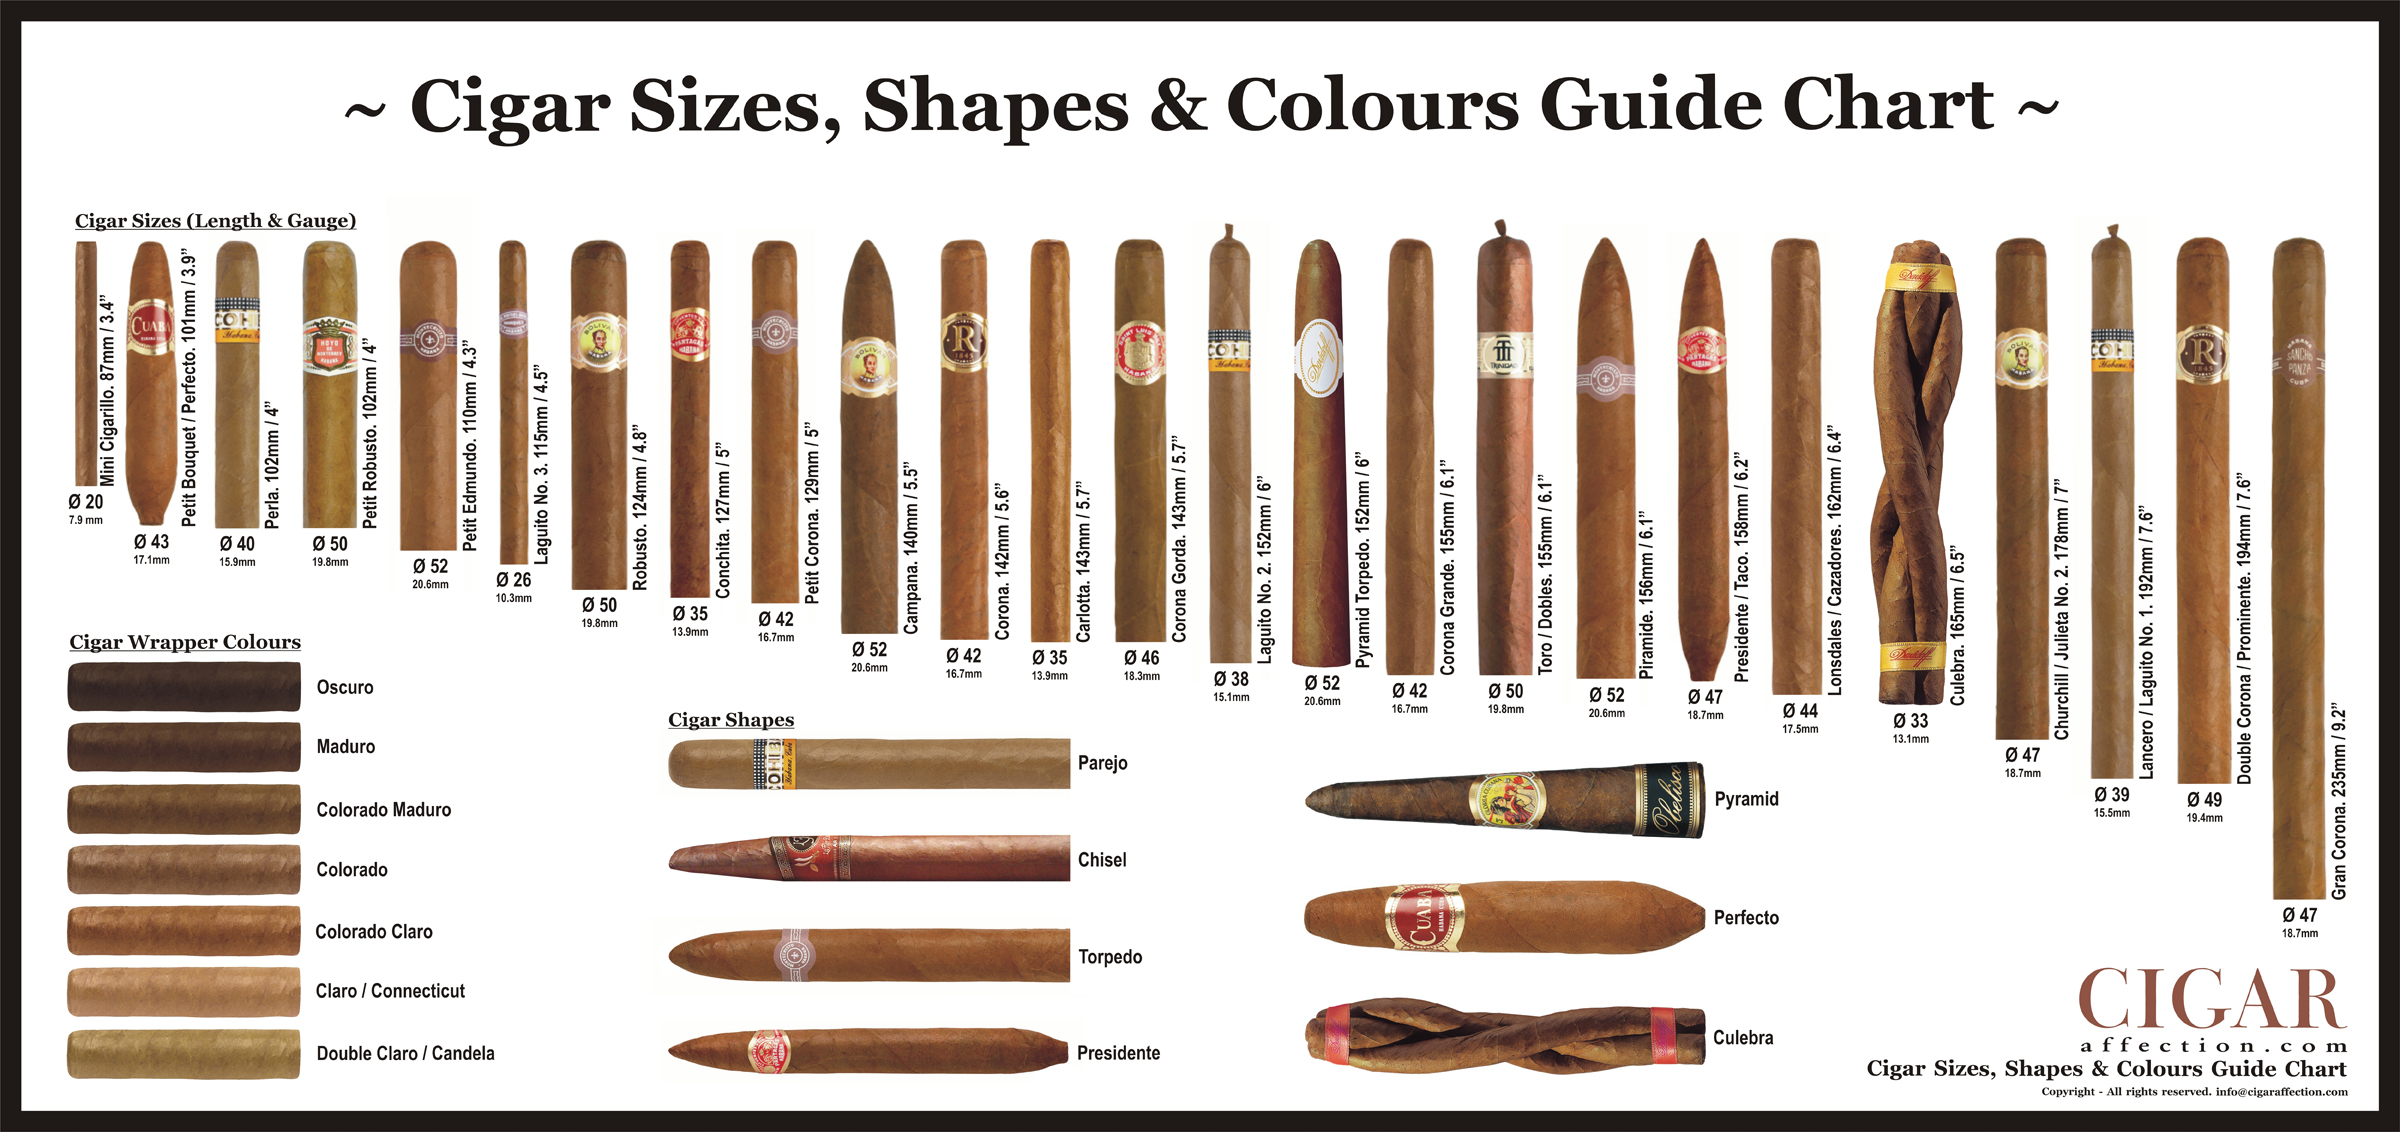 What is a cigar and why is it so popular among smokers